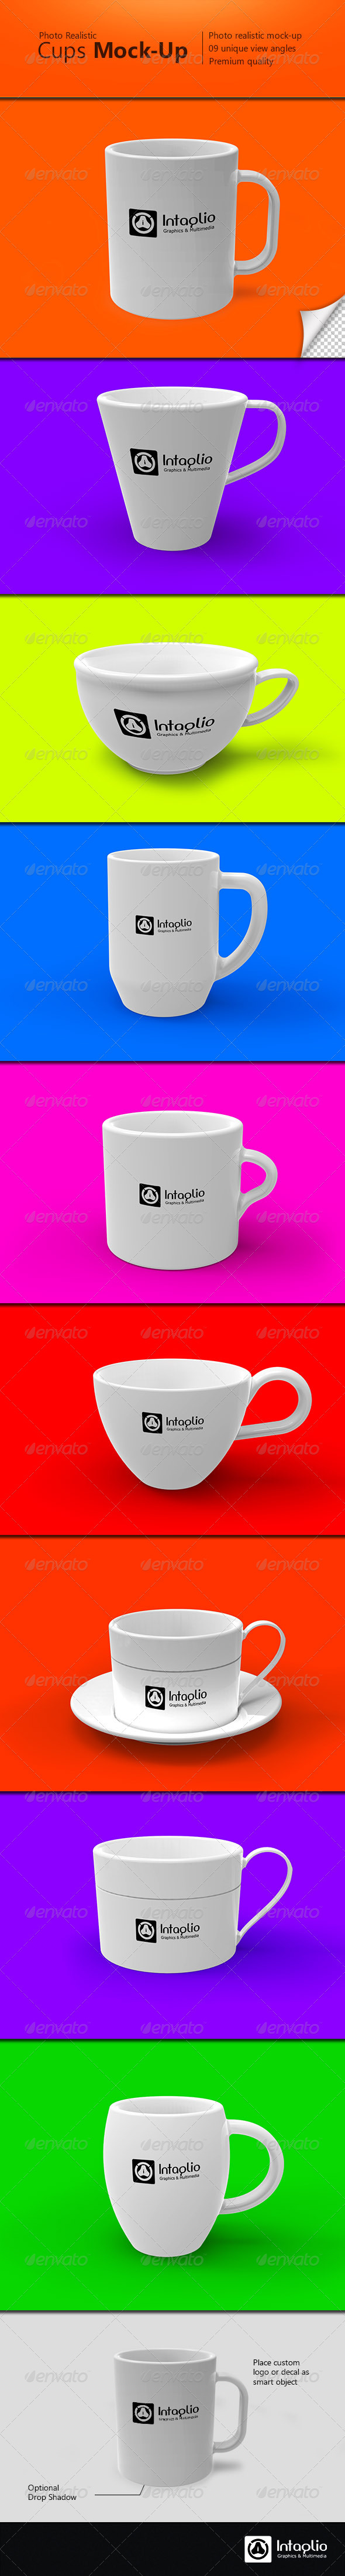 cups-mockup-preview.jpg